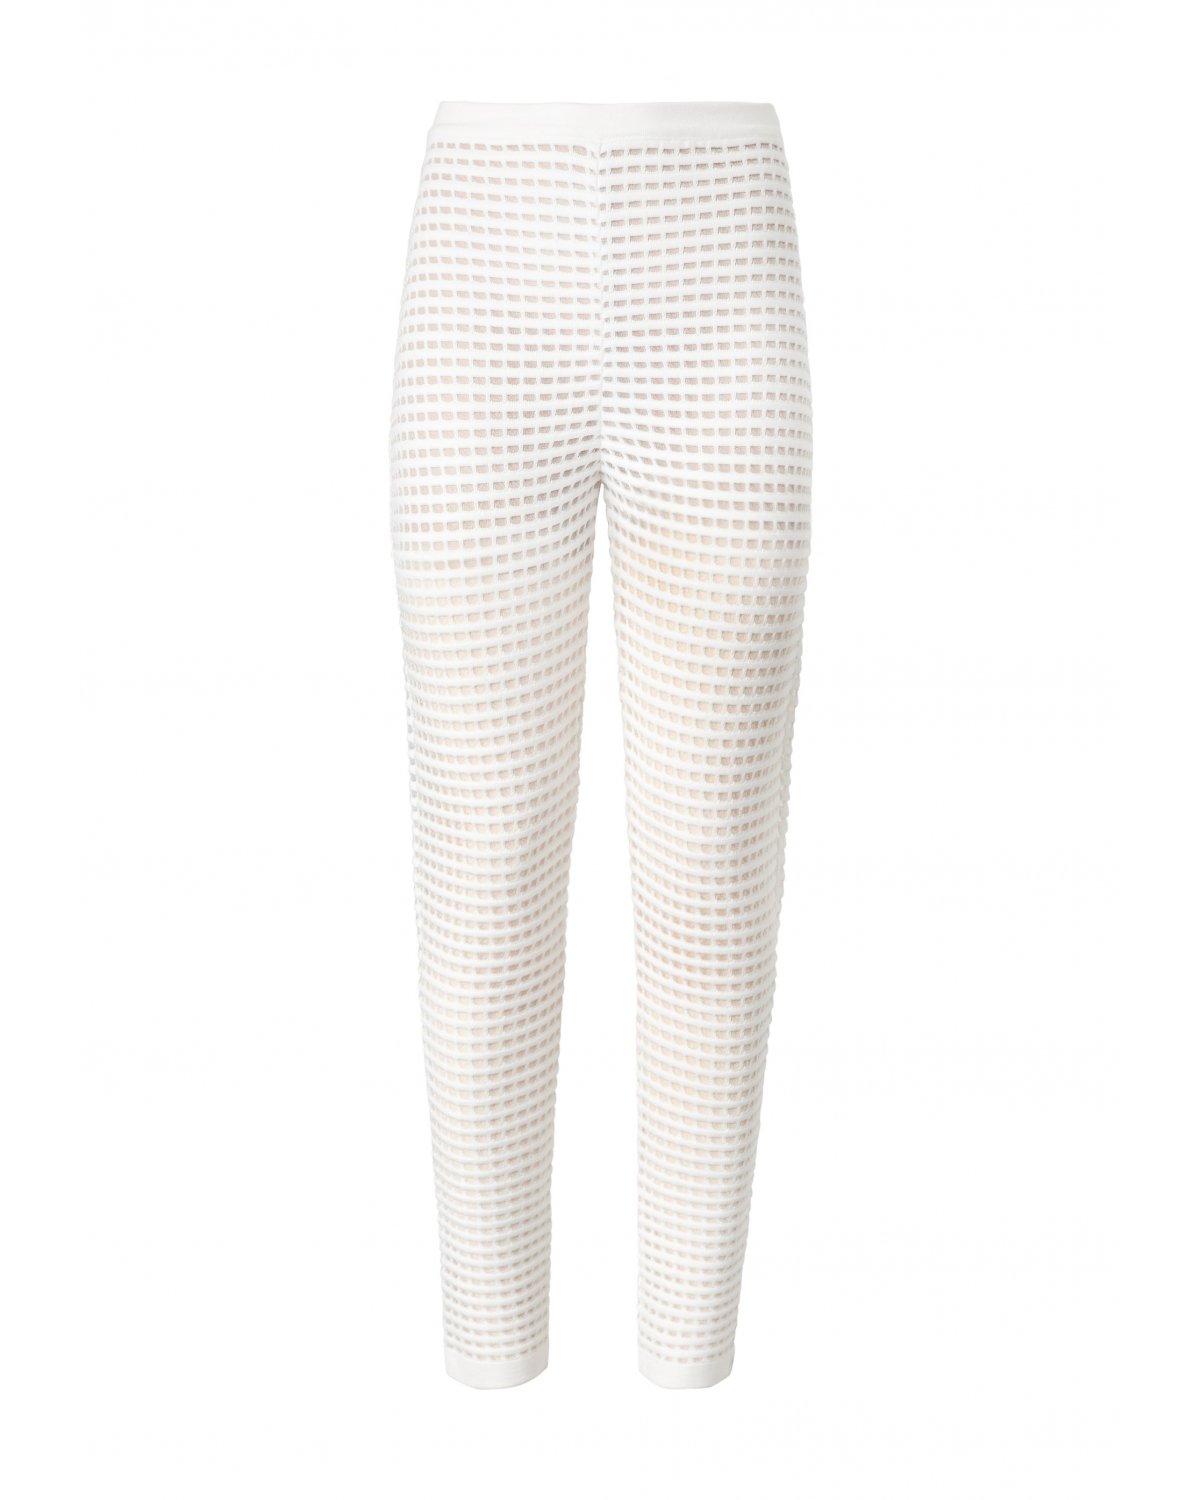 Knitted iconic pants | gregoracci-carousel-1, gregoracci-carousel-2, Iconic Capsule Collection, 73_74 | Genny